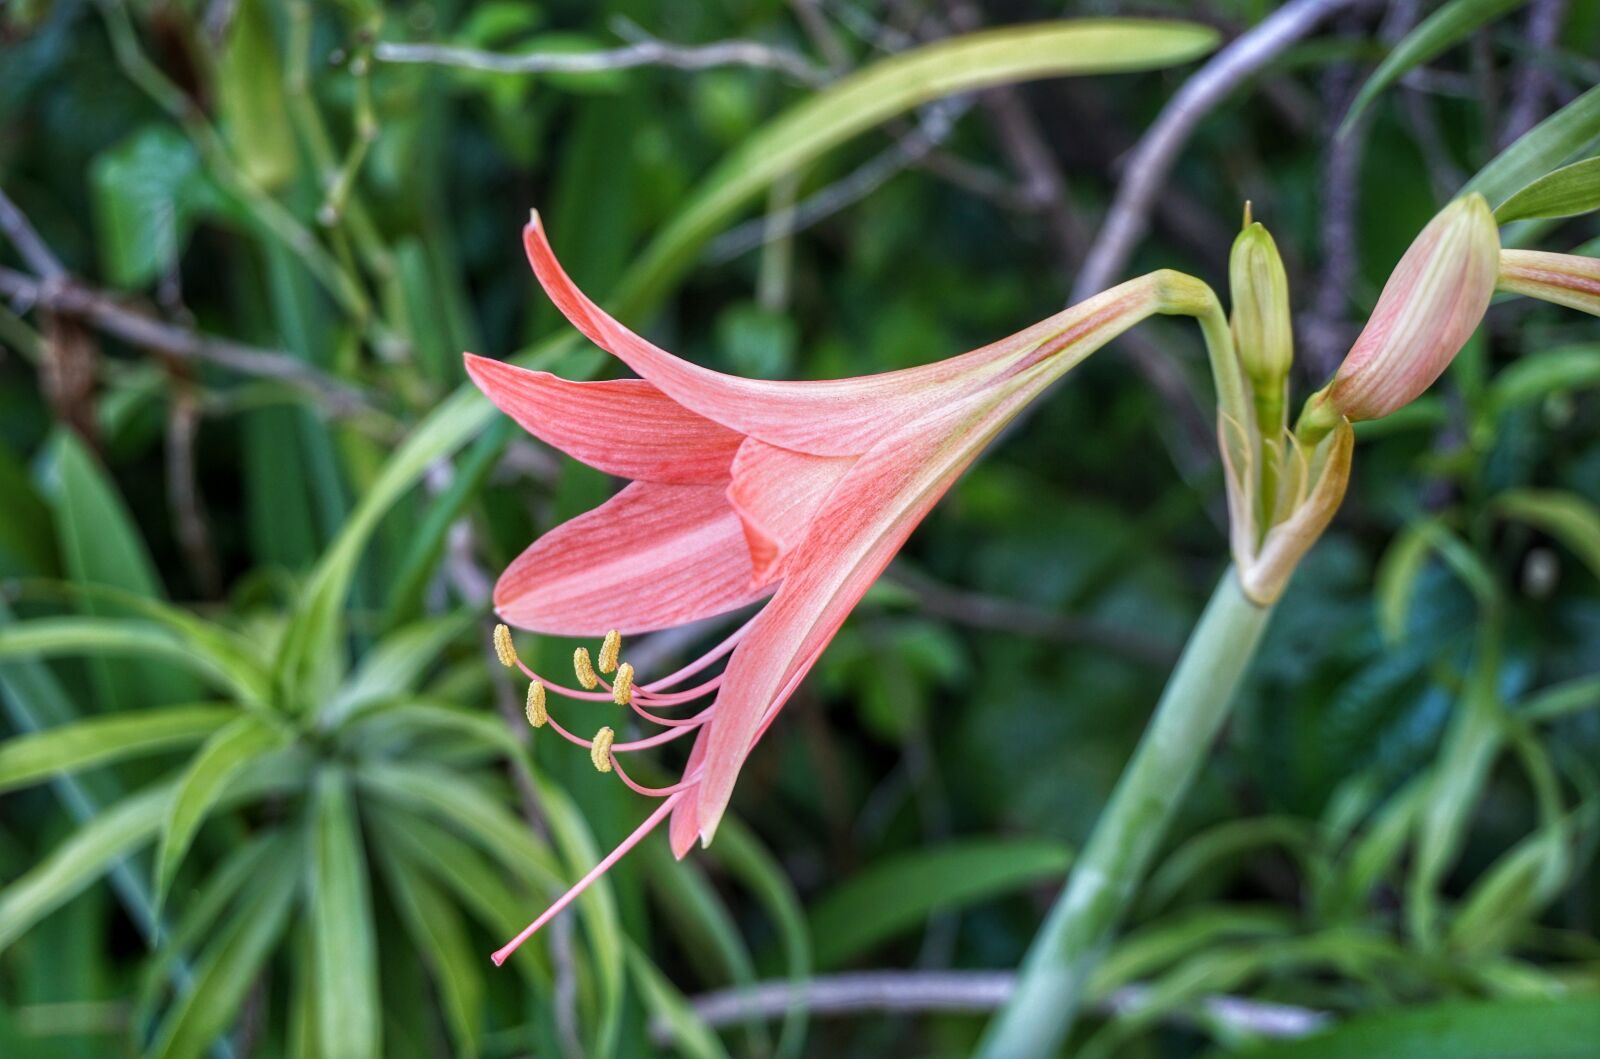 Sony a6300 sample photo. Striped barbados lily, lily photography